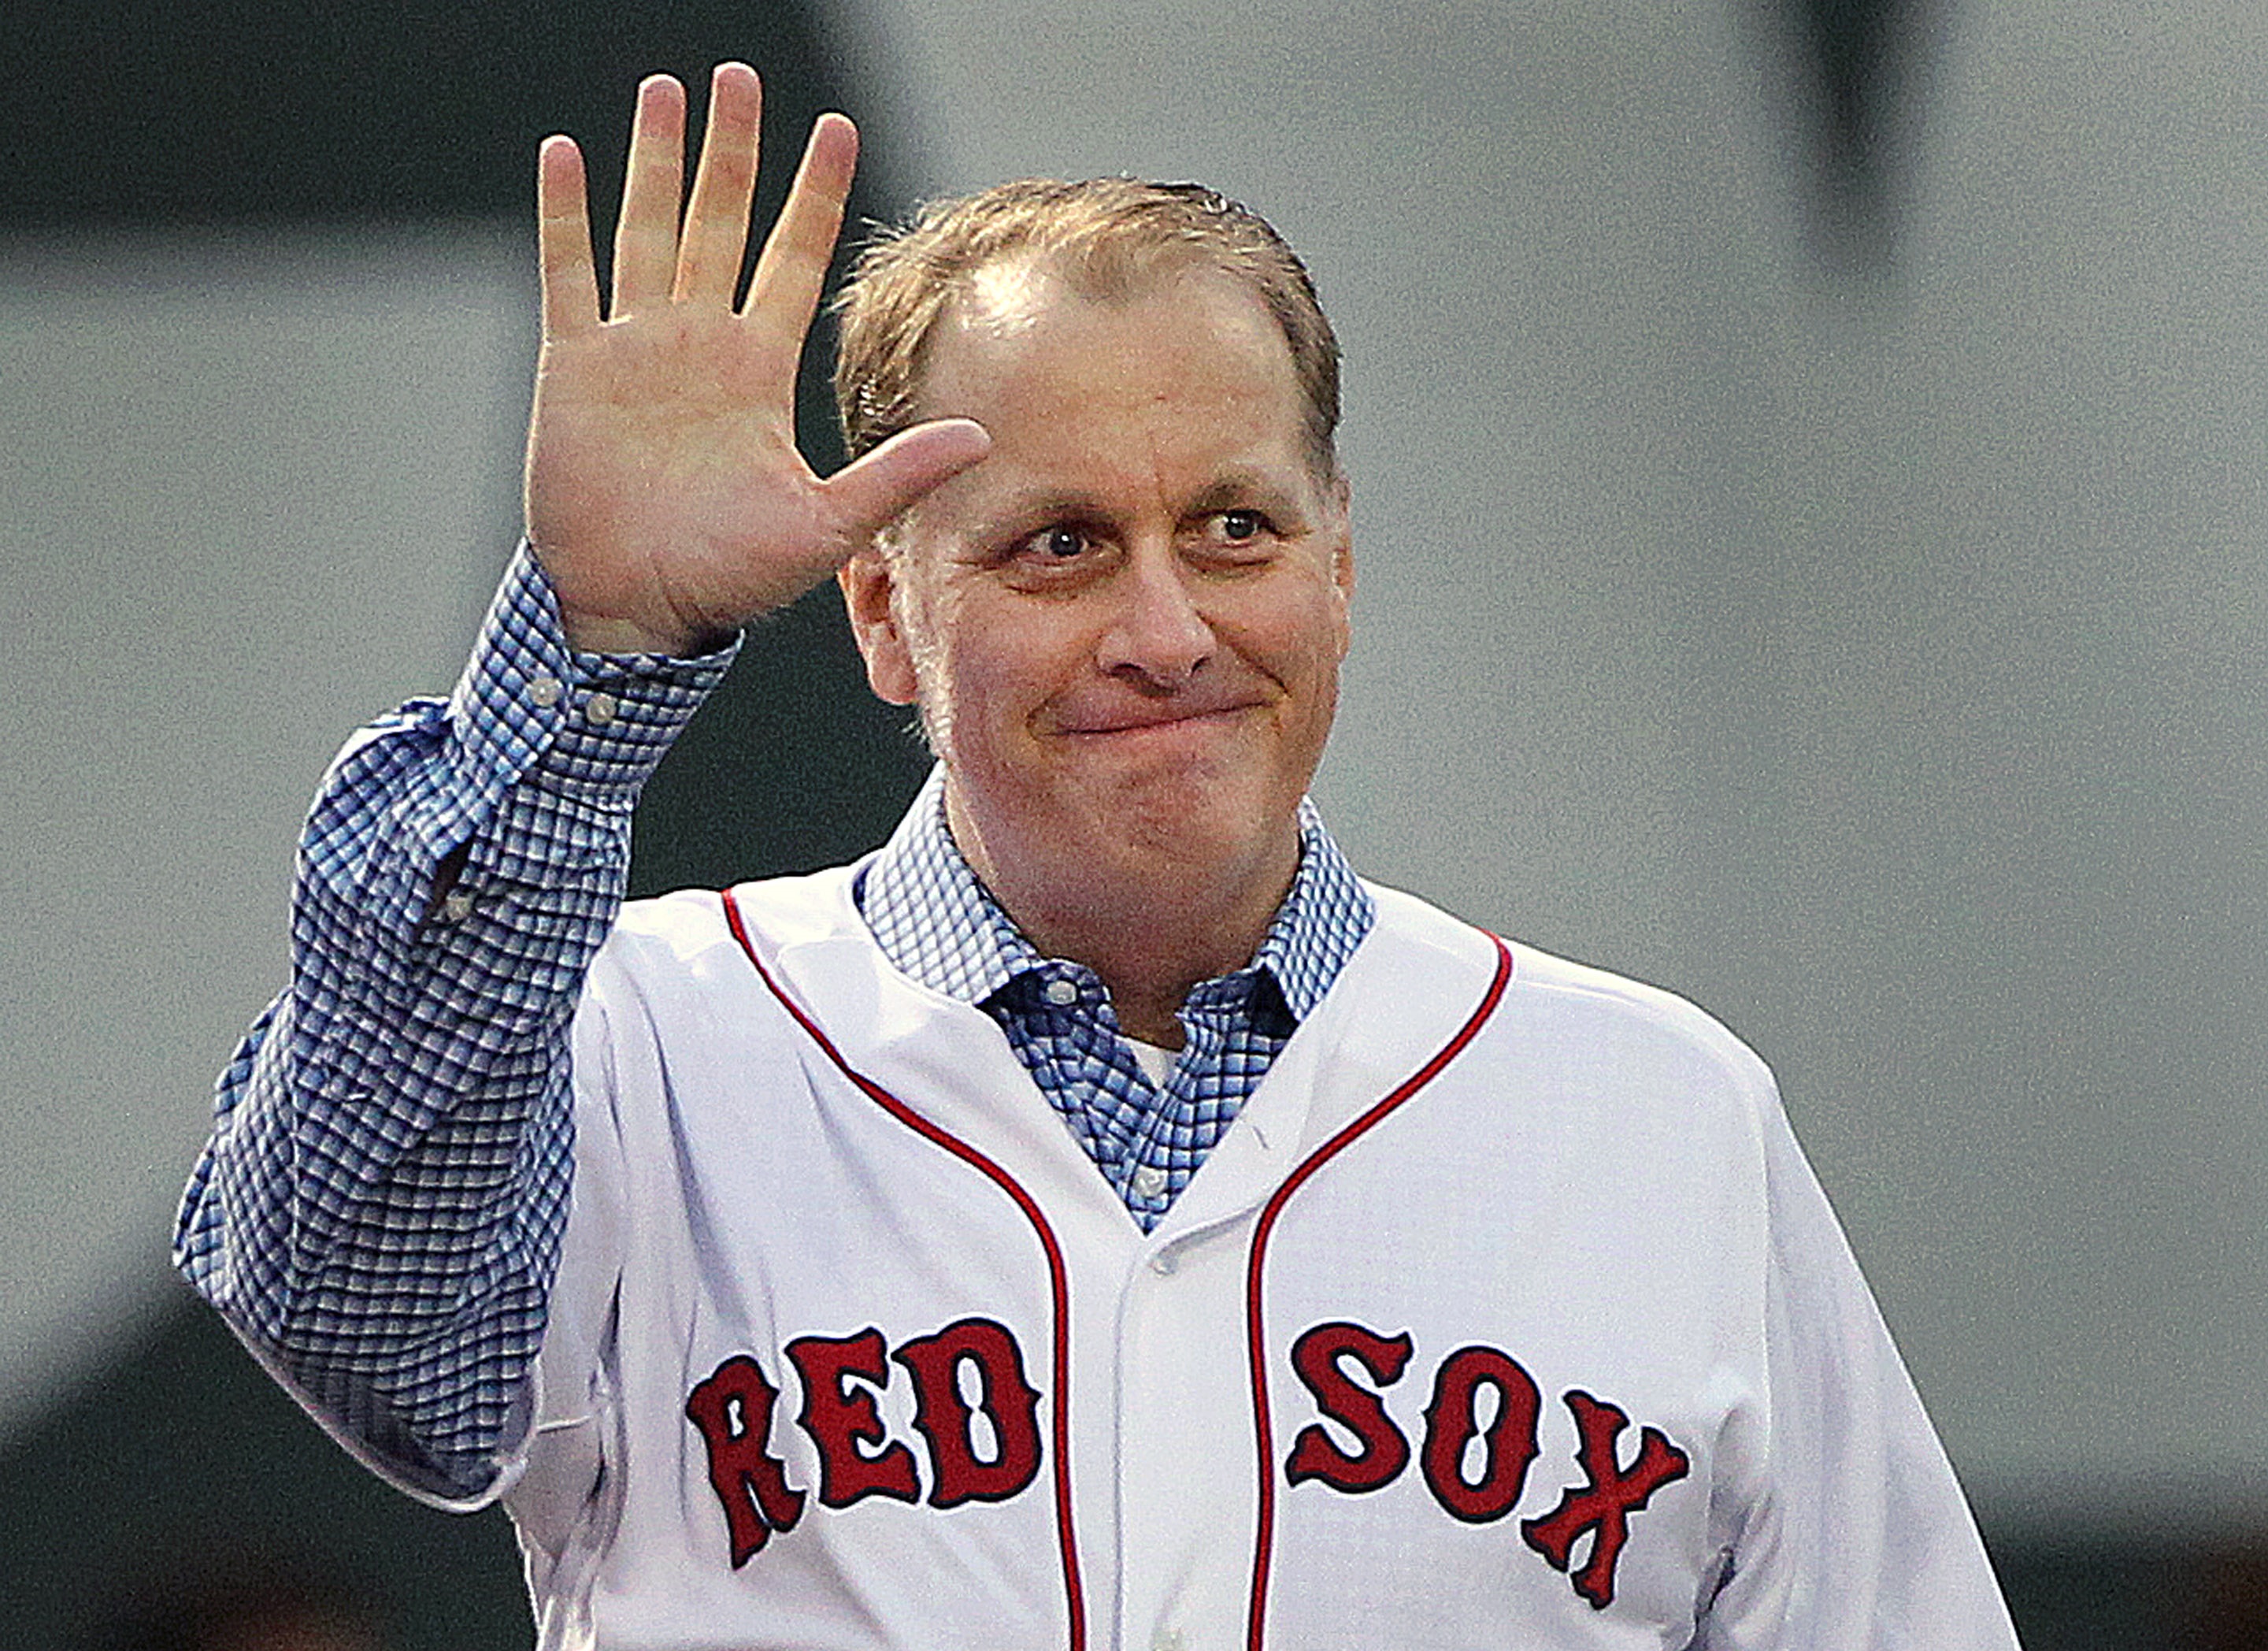 Former Boston Red Sox pitcher Curt Schilling is honored before a game between the Red Sox and the Atlanta Braves on May 28, 2014 in Boston. (Boston Globe via Getty Images)